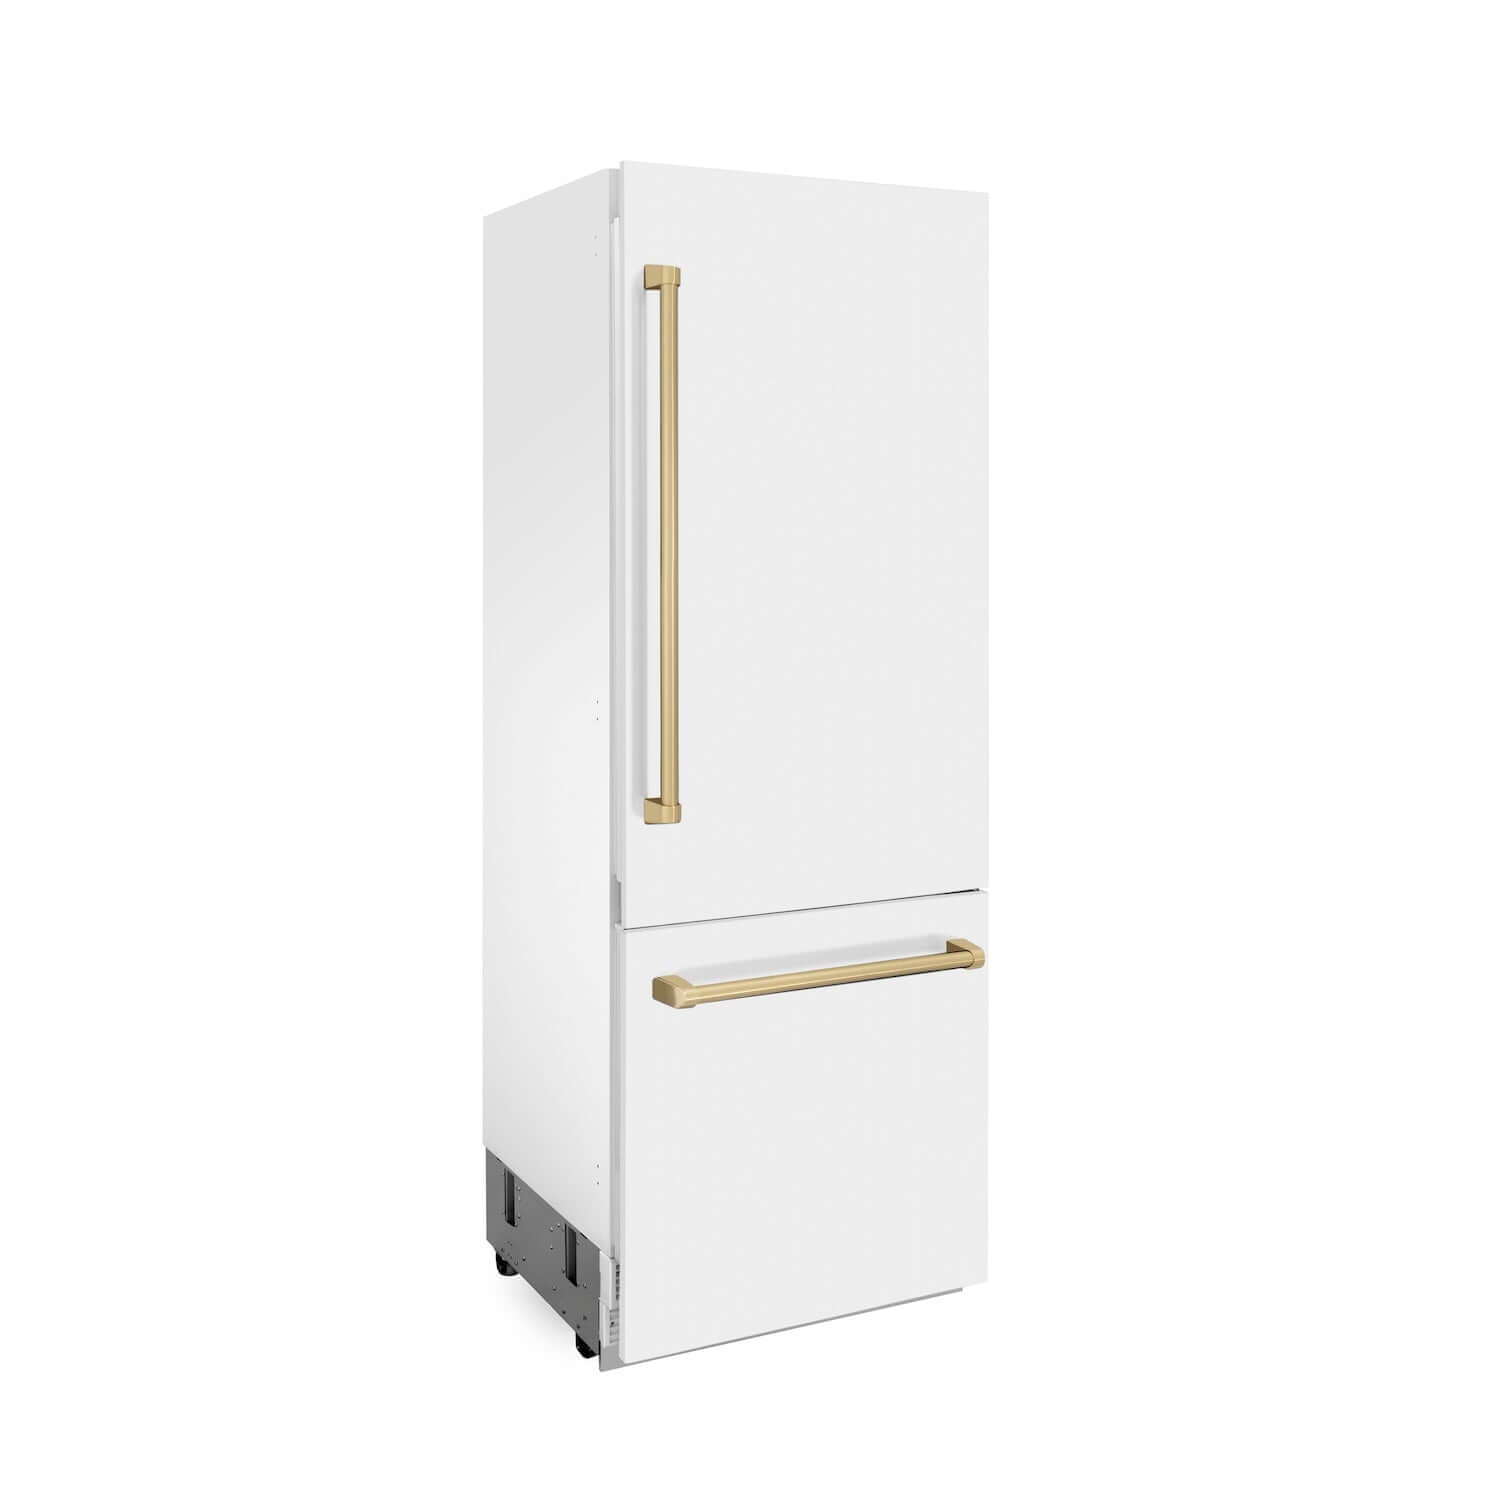 ZLINE Autograph Edition 30 in. 16.1 cu. ft. Built-in 2-Door Bottom Freezer Refrigerator with Internal Water and Ice Dispenser in White Matte with Champagne Bronze Accents (RBIVZ-WM-30-CB) side.